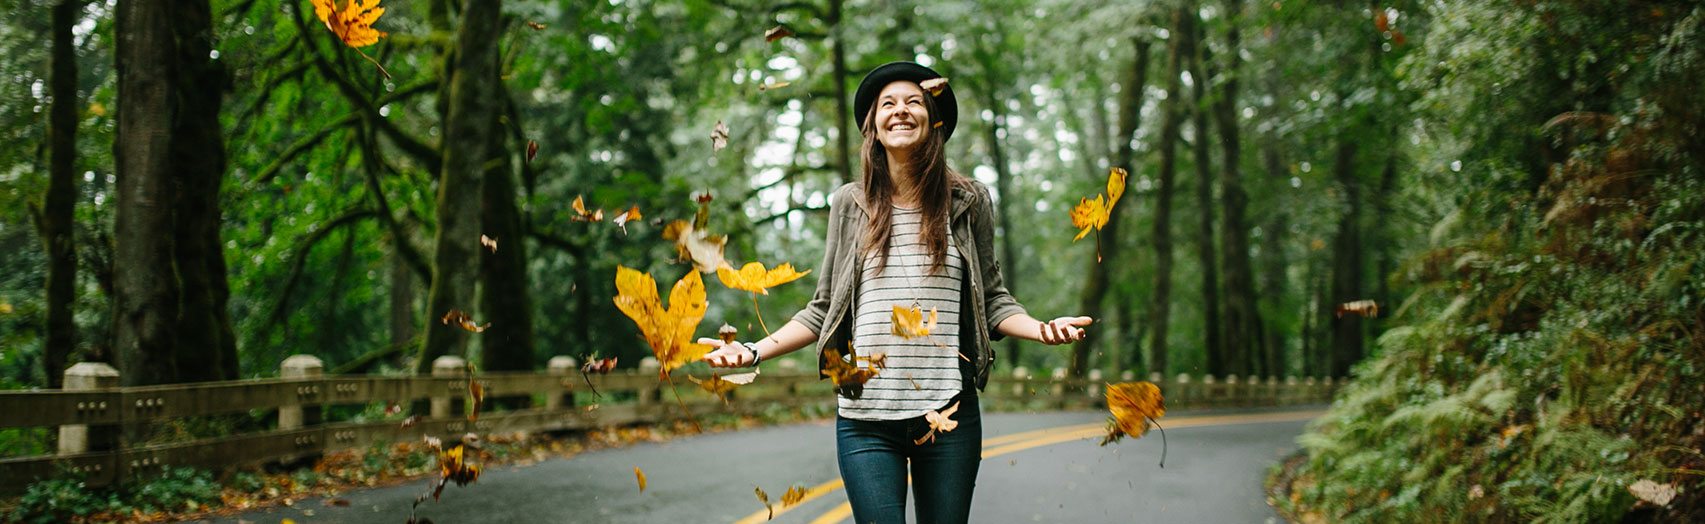 Wellness in nature: 5 ideas for autumn